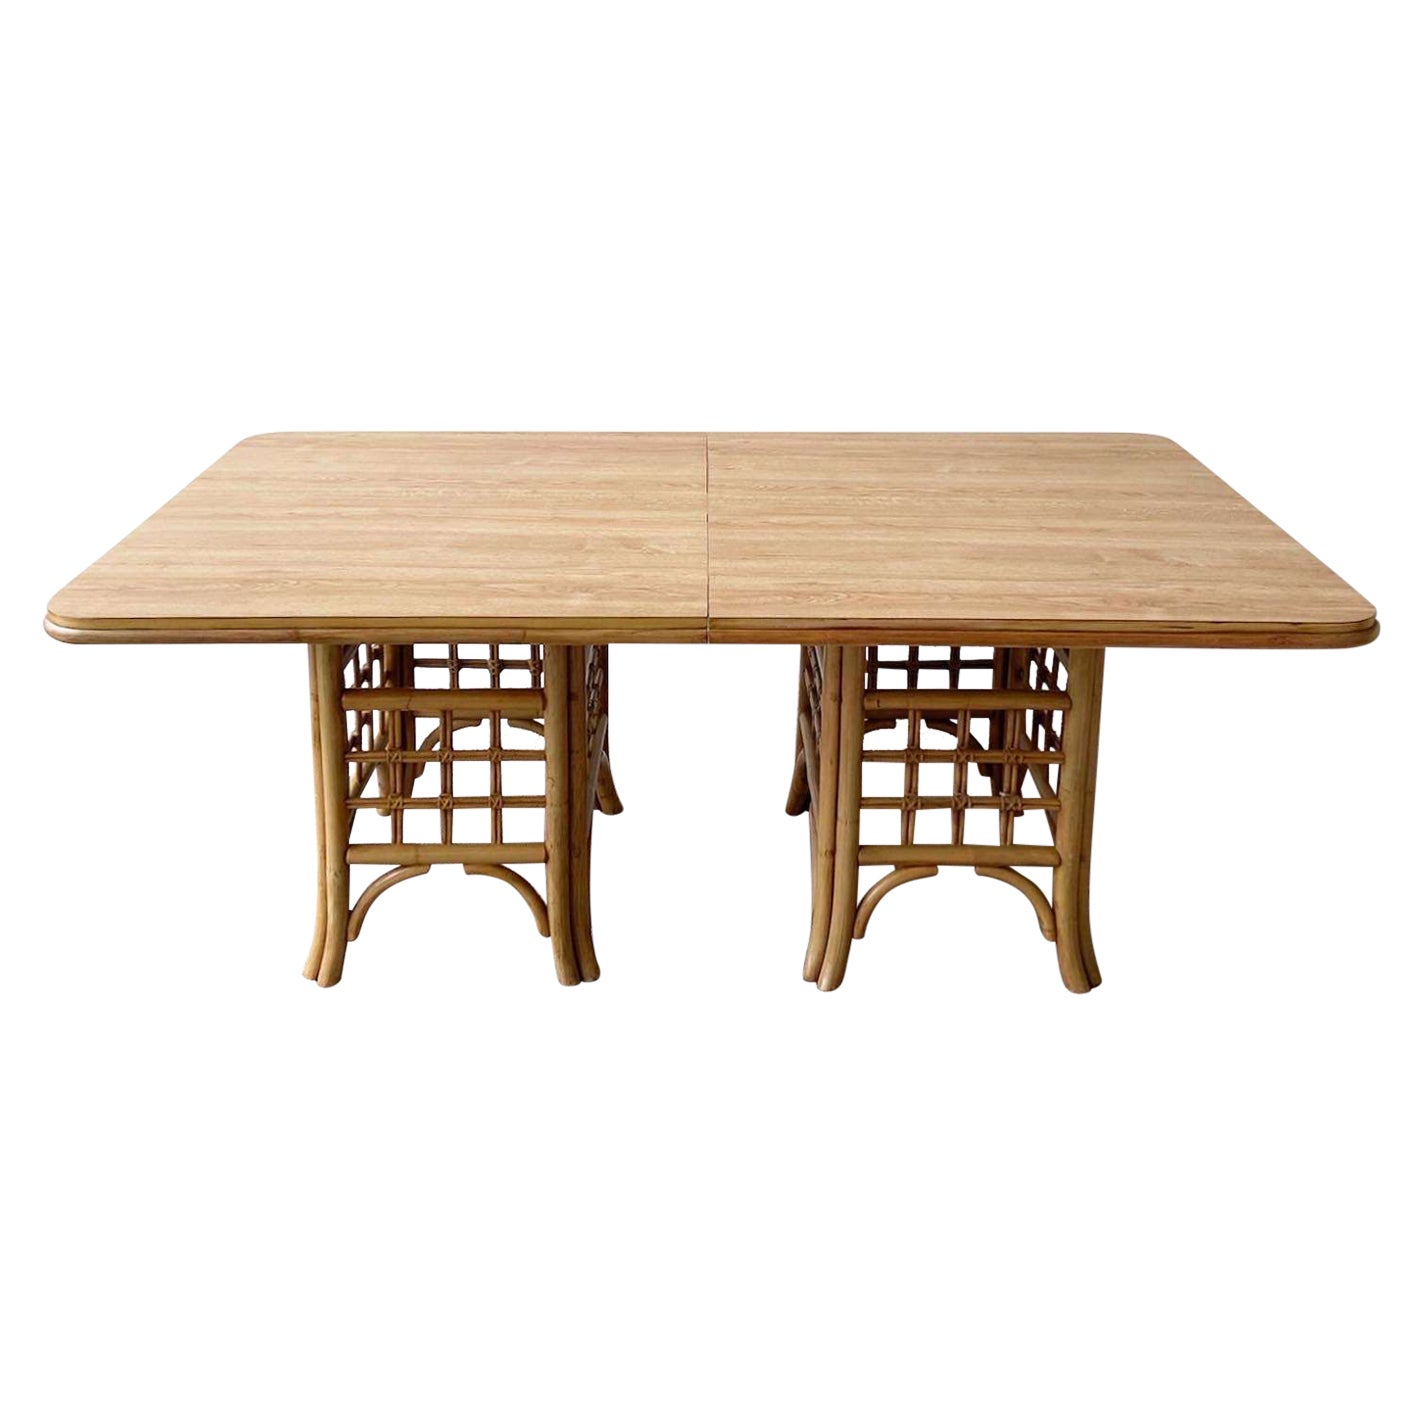 Boho Chic Dining Table For Sale